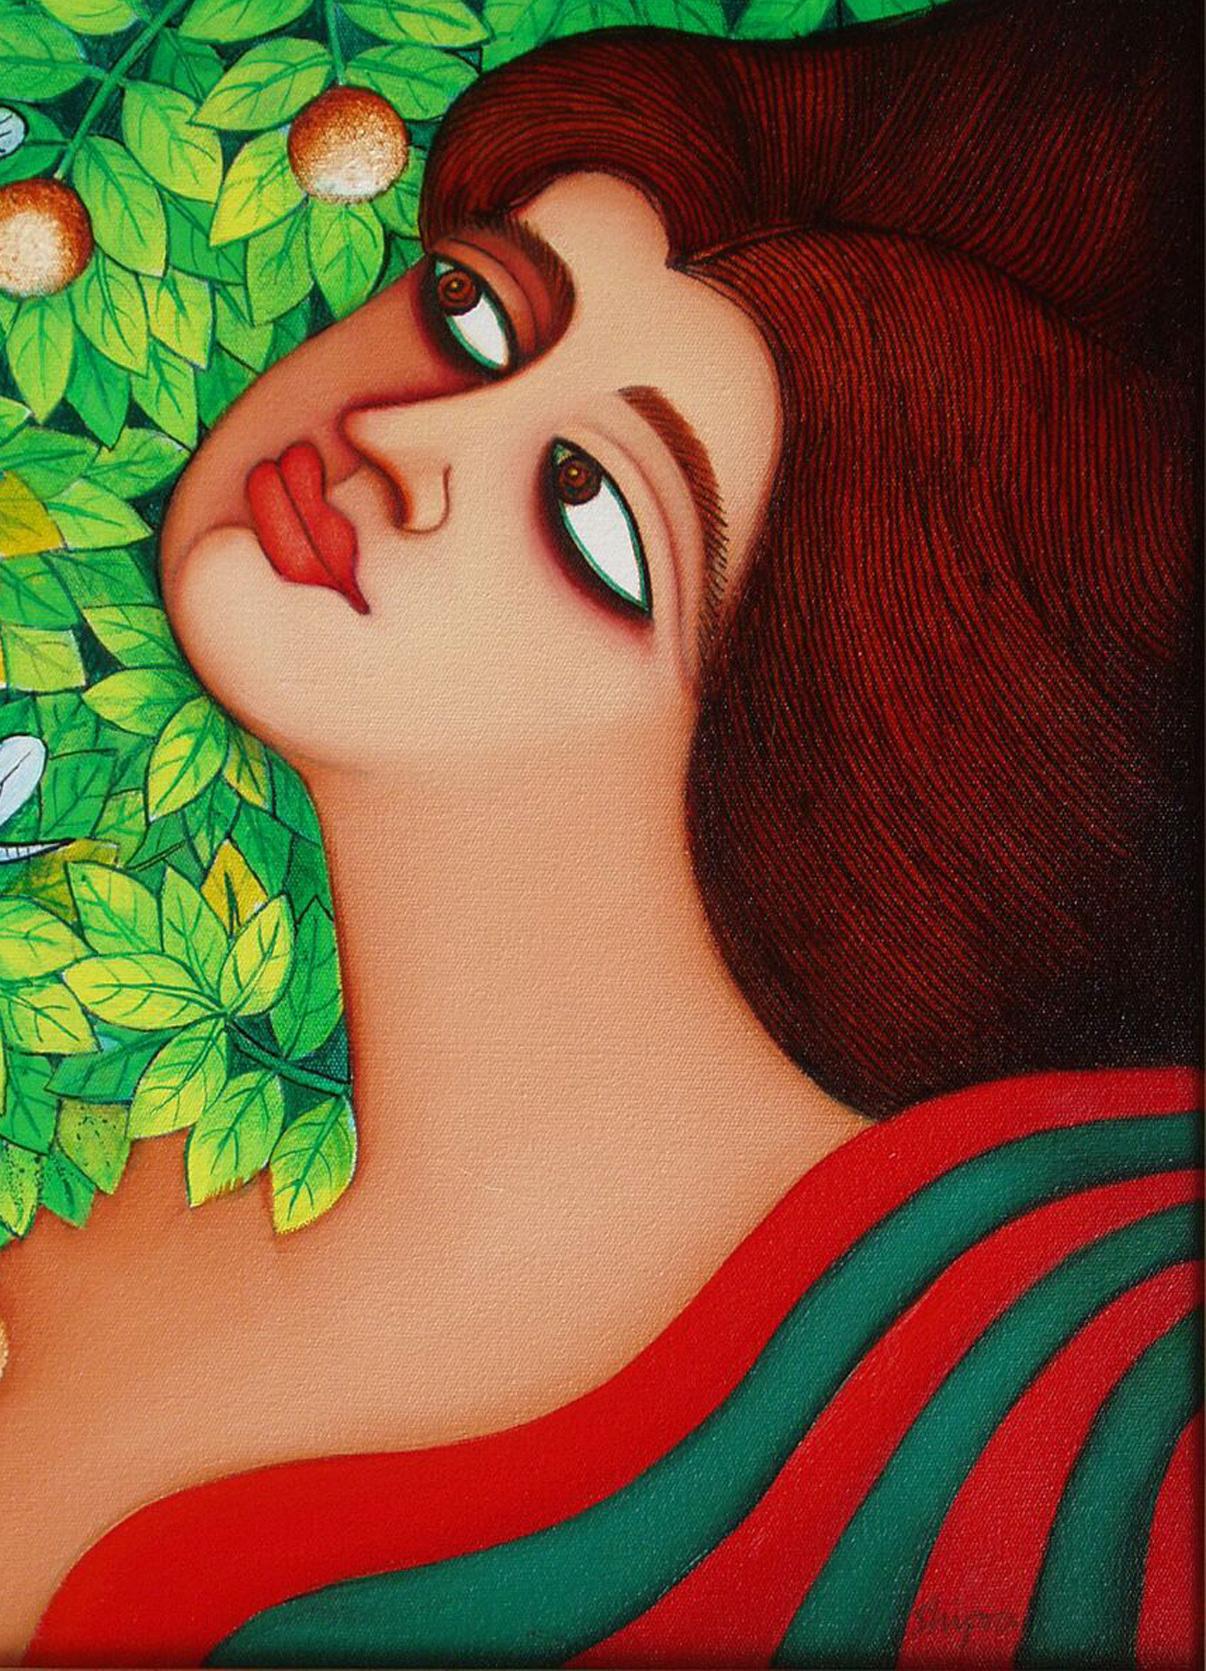 Large eyes women in flower garden wearing a green, red saree by Indian Artist - Black Landscape Painting by Shipra Bhattacharya